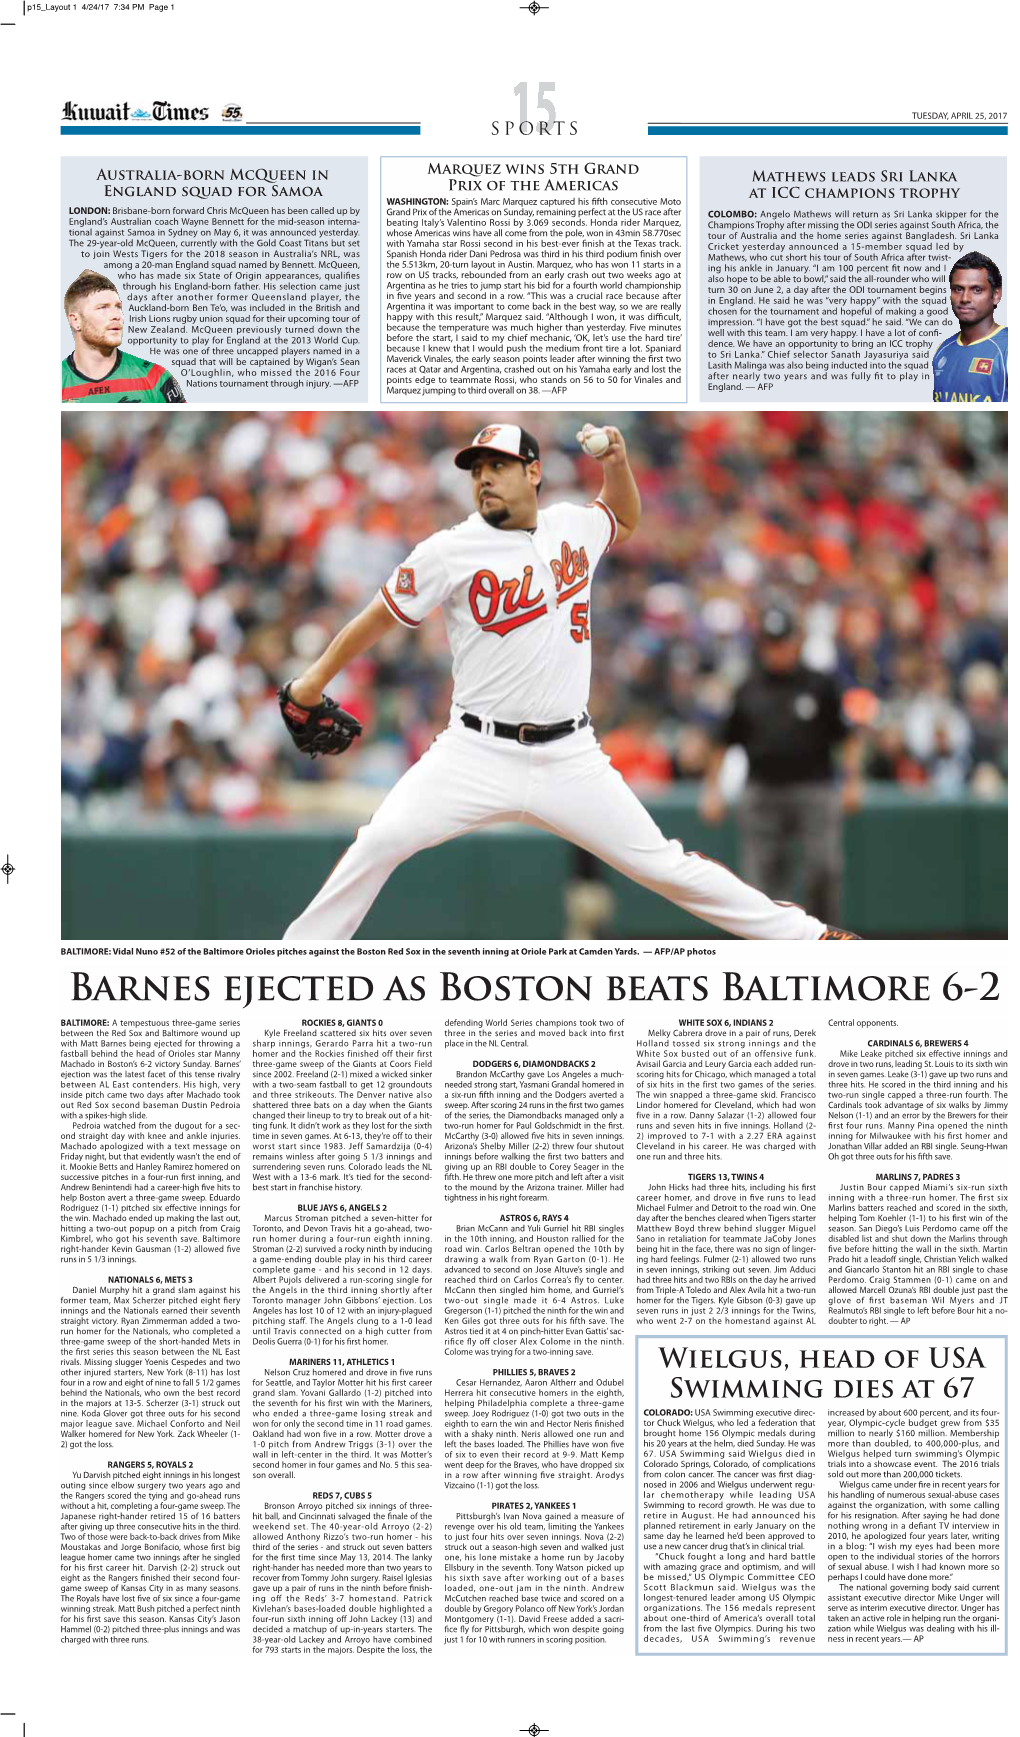 Barnes Ejected As Boston Beats Baltimore 6-2